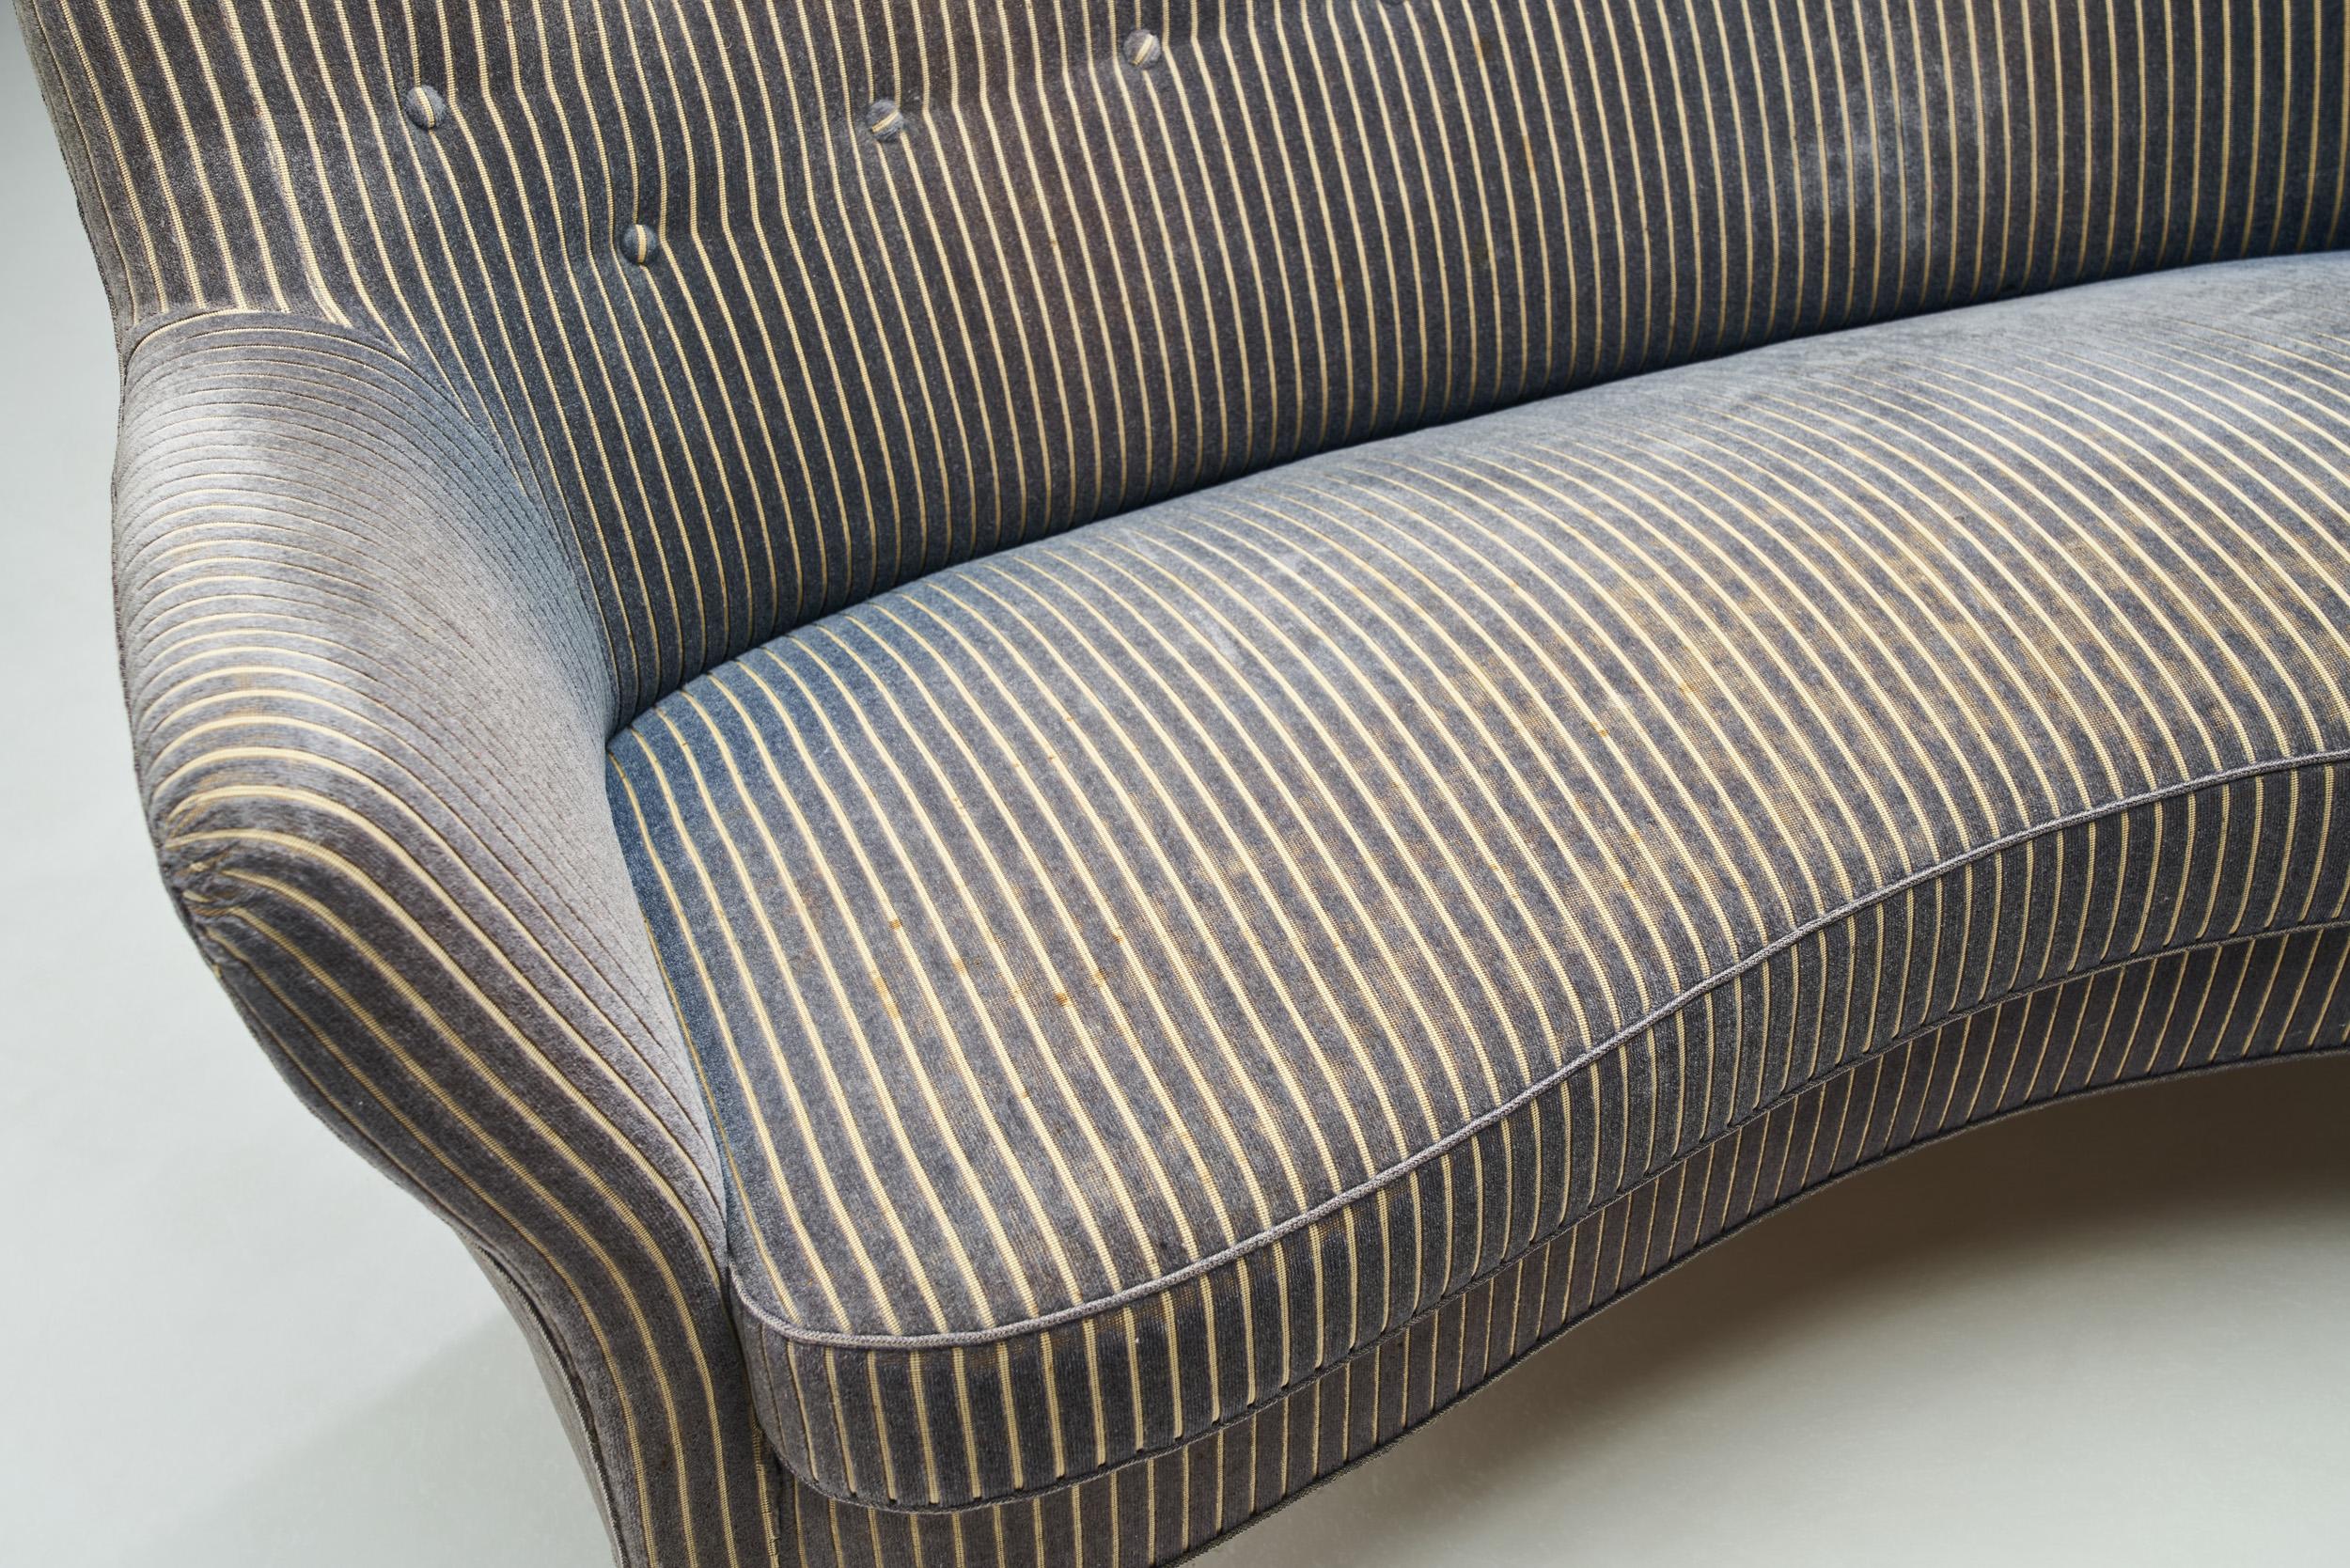 Danish Cabinetmaker Two-Seater Sofa with Striped Upholstery, Denmark 1940s For Sale 2